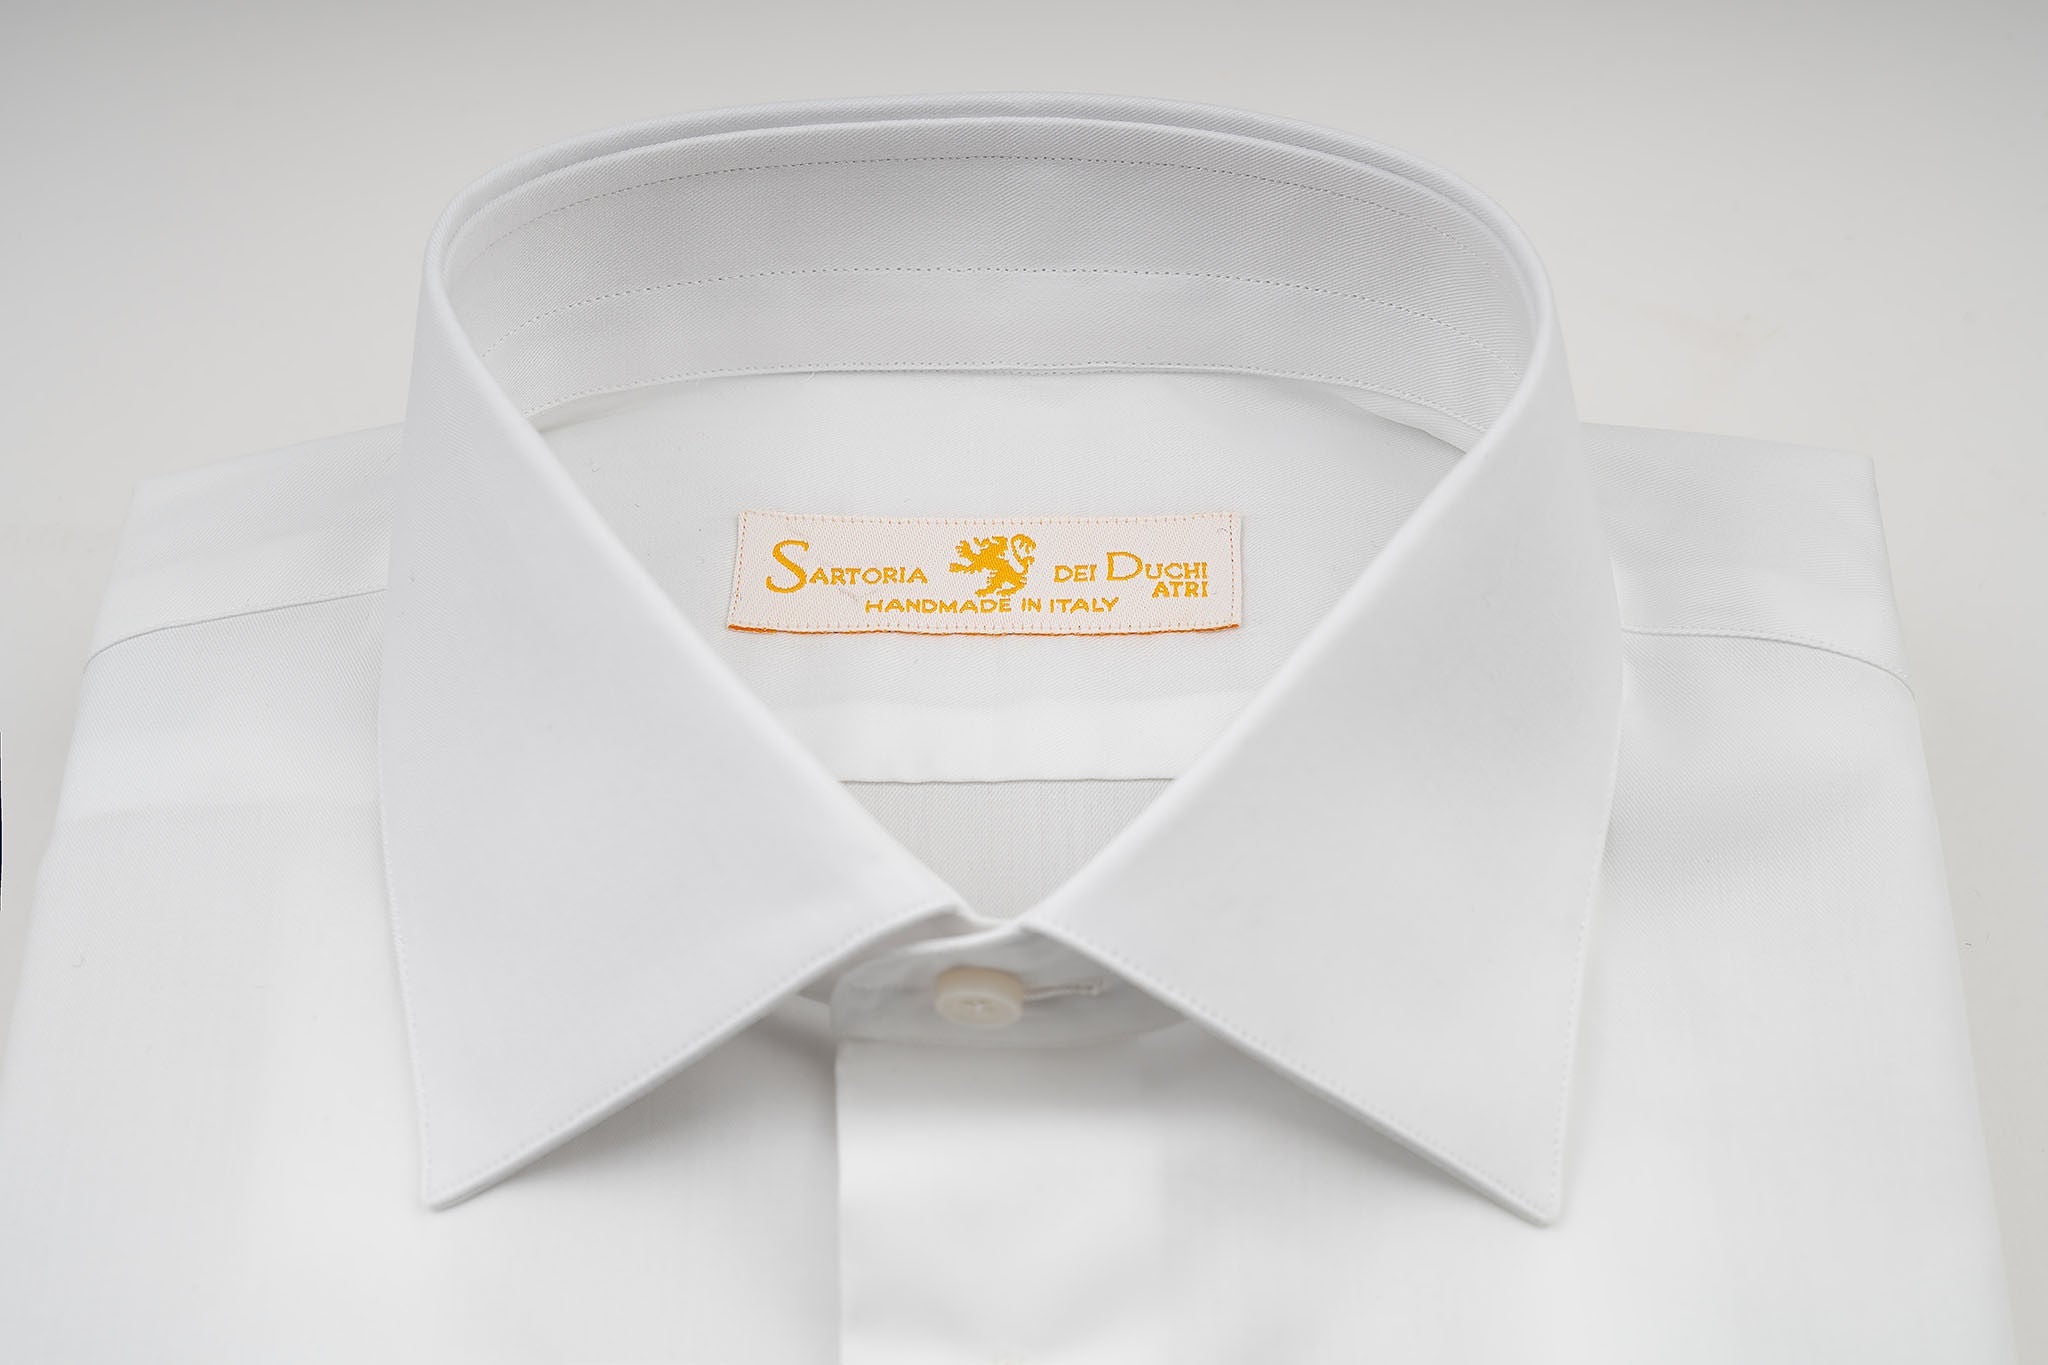 Made with a 140/2 cotton twill by Thomas Mason "Hampton",  in white color. This long sleeve shirt is made with  a semi French collar and a rounded wrist. The stitching  is 5 mm and the buttons, applied by hand, are in mother  of pearl Australia.  The fit is regular-Sartoria Dei Duchi-Atri